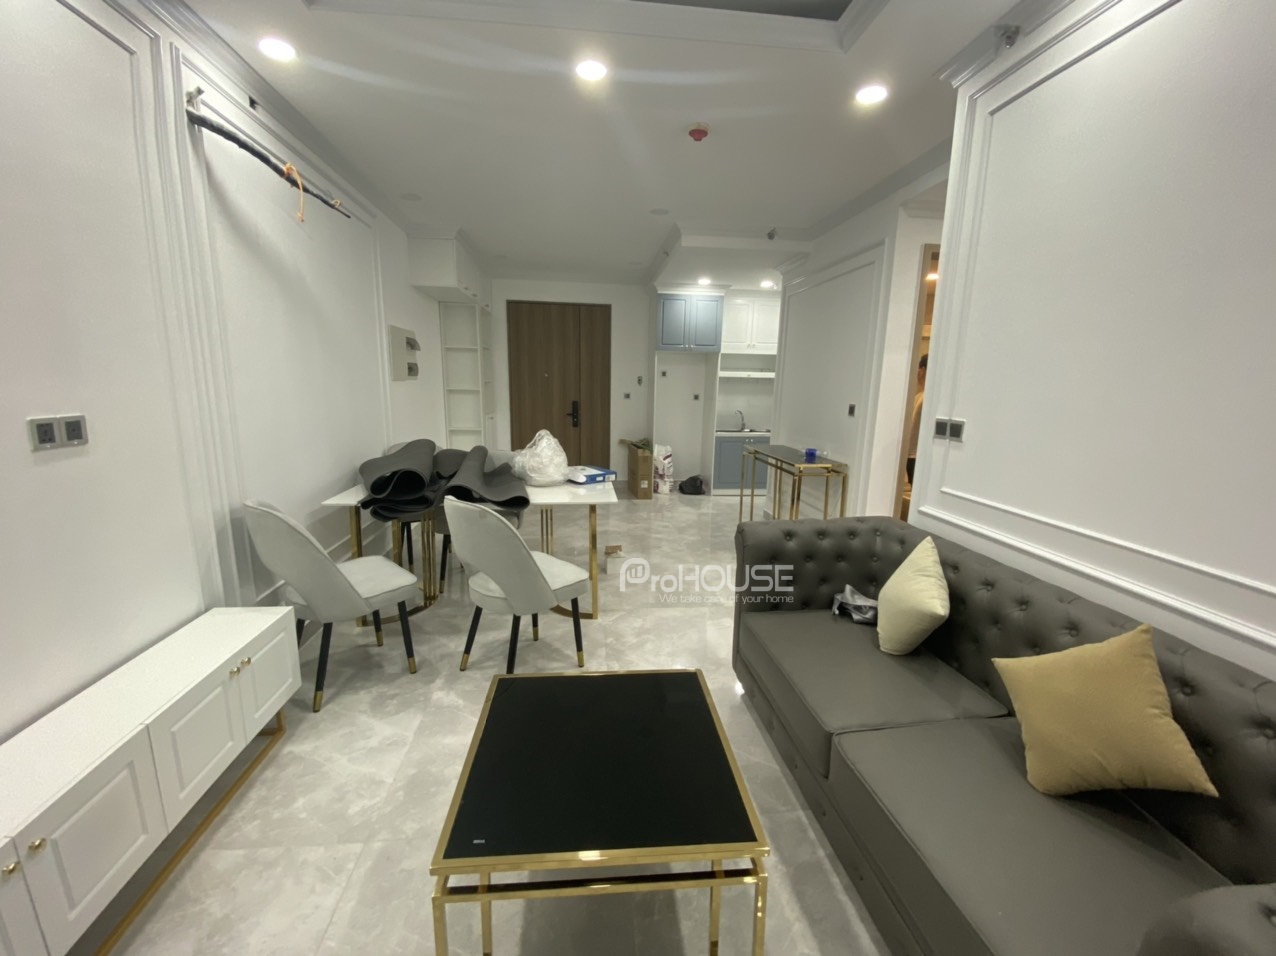 2 bedroom luxury apartment for rent in Midtown M8 with full furniture